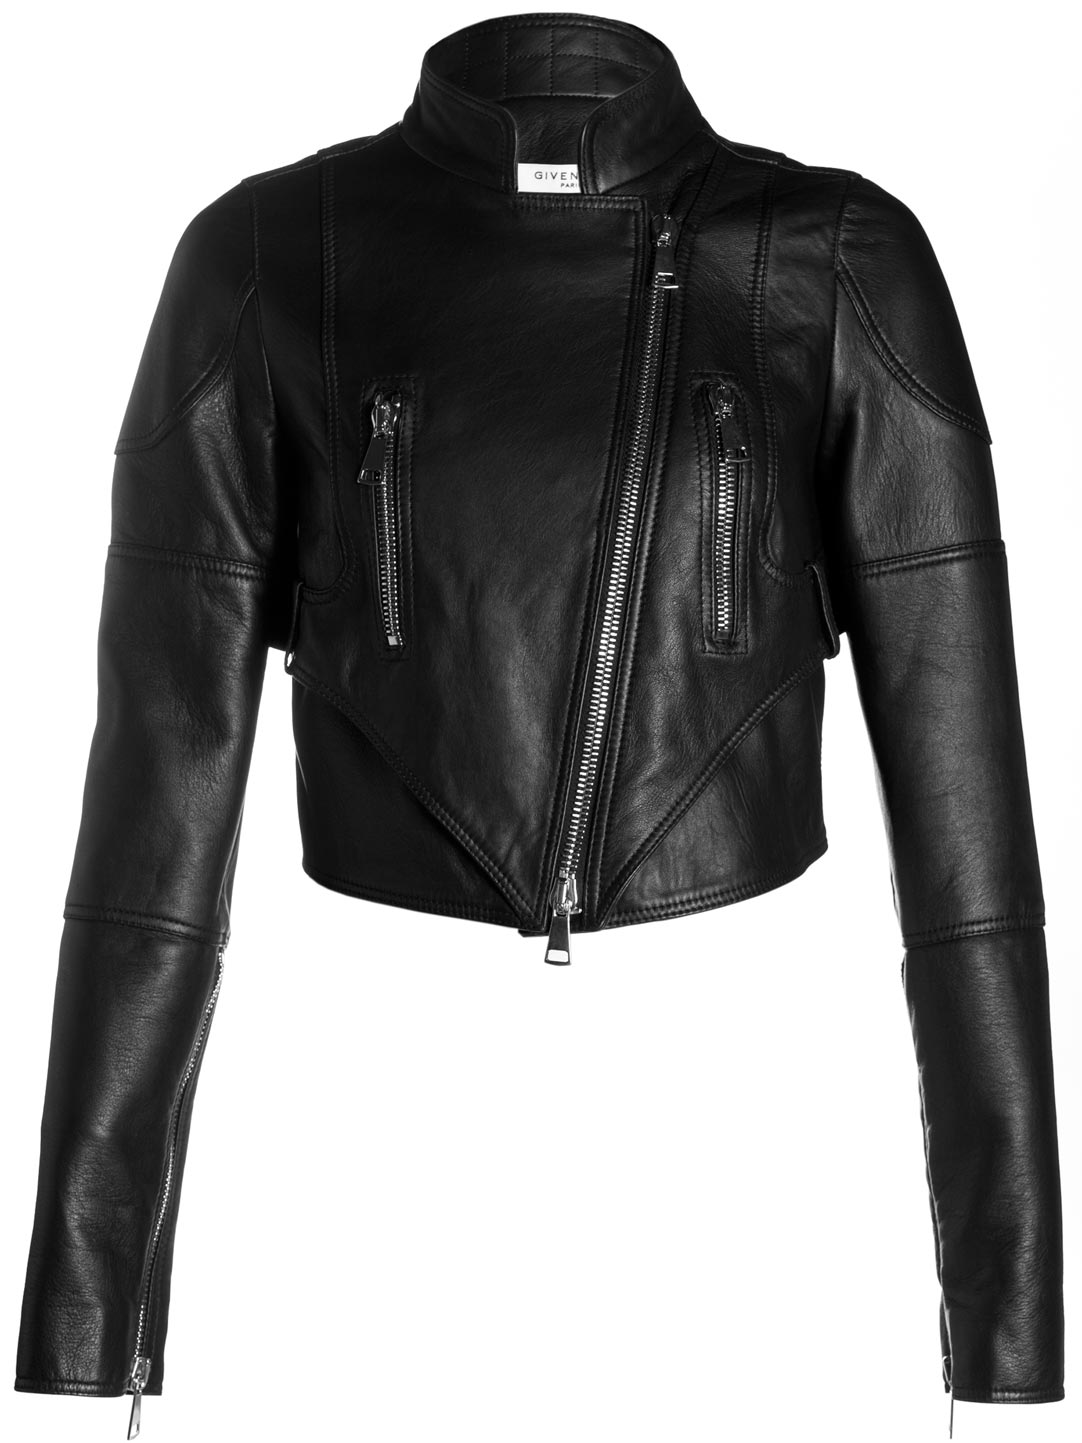 Lyst - Givenchy Givenchy Womens Cropped Leather Jacket in Black